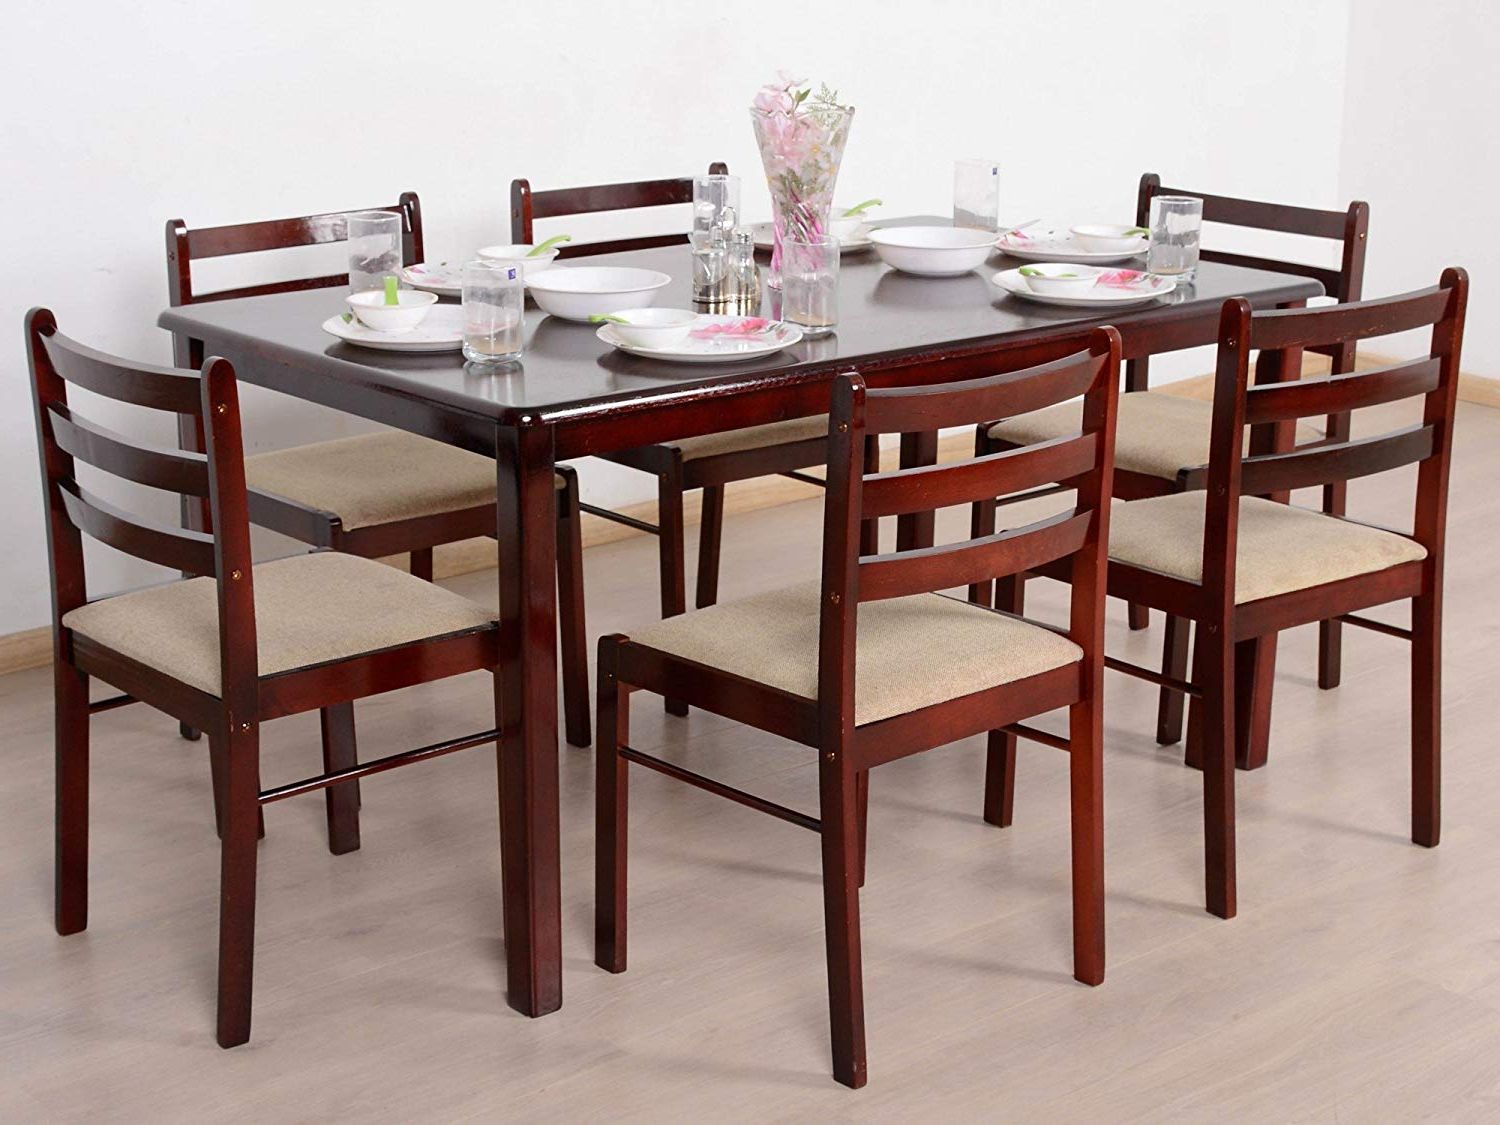 6 Seater Dining Table Design : Awe-inspiring 6 Person Dining Table ...